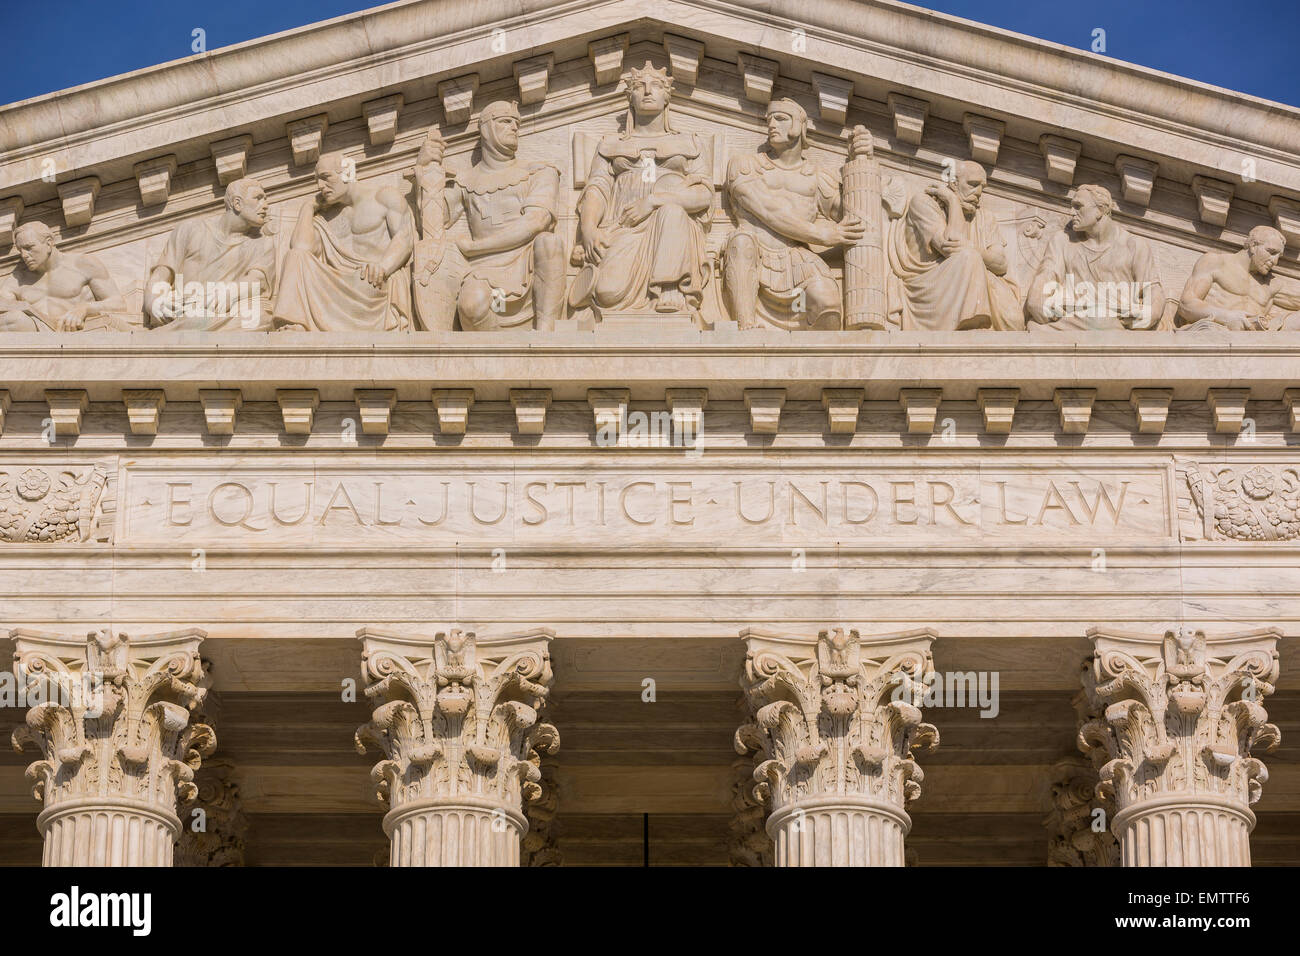 WASHINGTON, DC, USA - Equal Justice Under Law phrase engraved on front of United States Supreme Court building exterior. Stock Photo